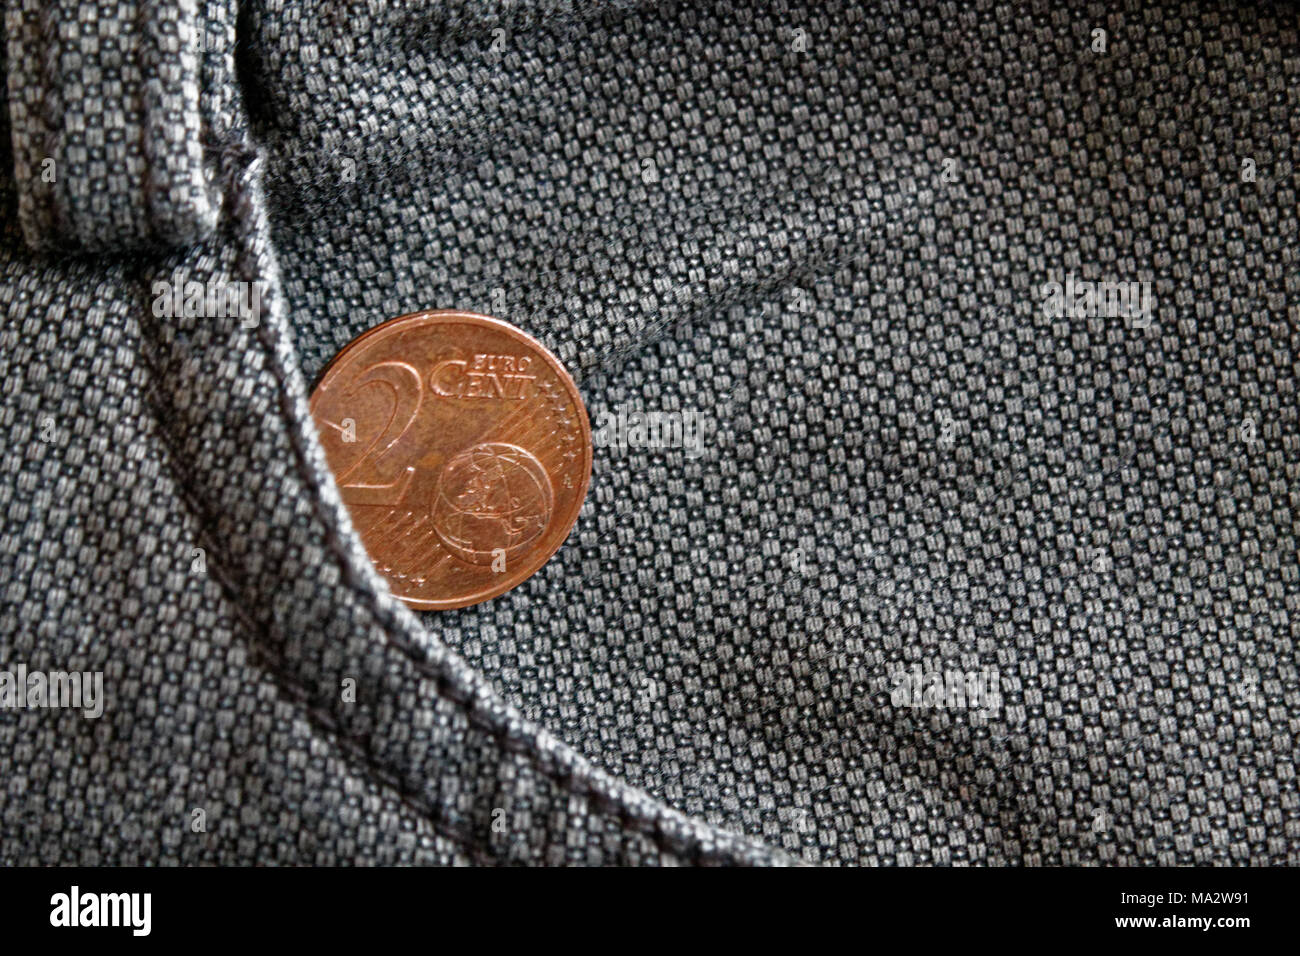 Euro coin with a denomination of 2 euro cent in the pocket of worn brown denim jeans Stock Photo